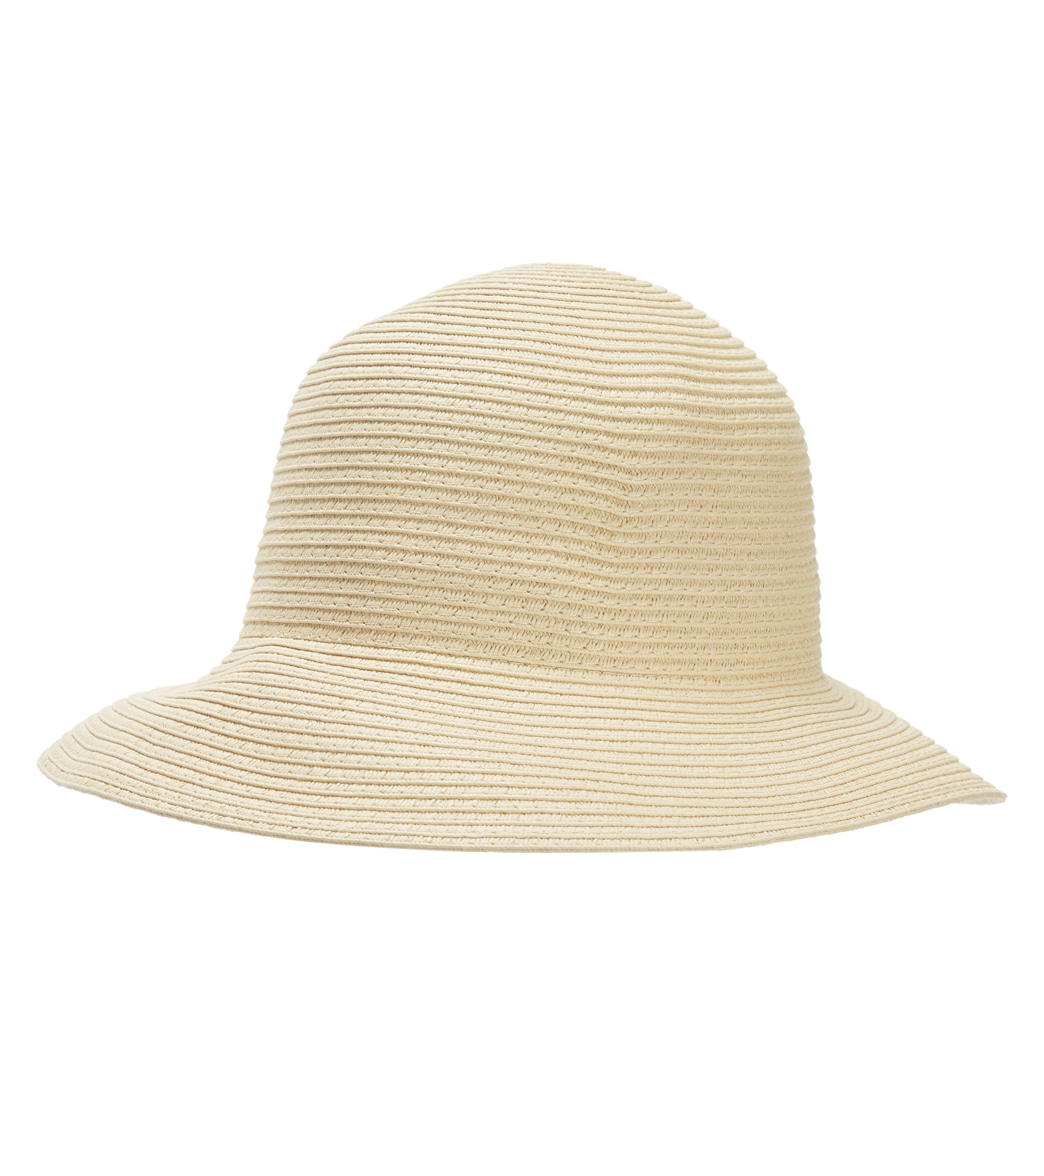 Physician Endorsed Women's Serena Straw Hat - Natural One Size - Swimoutlet.com